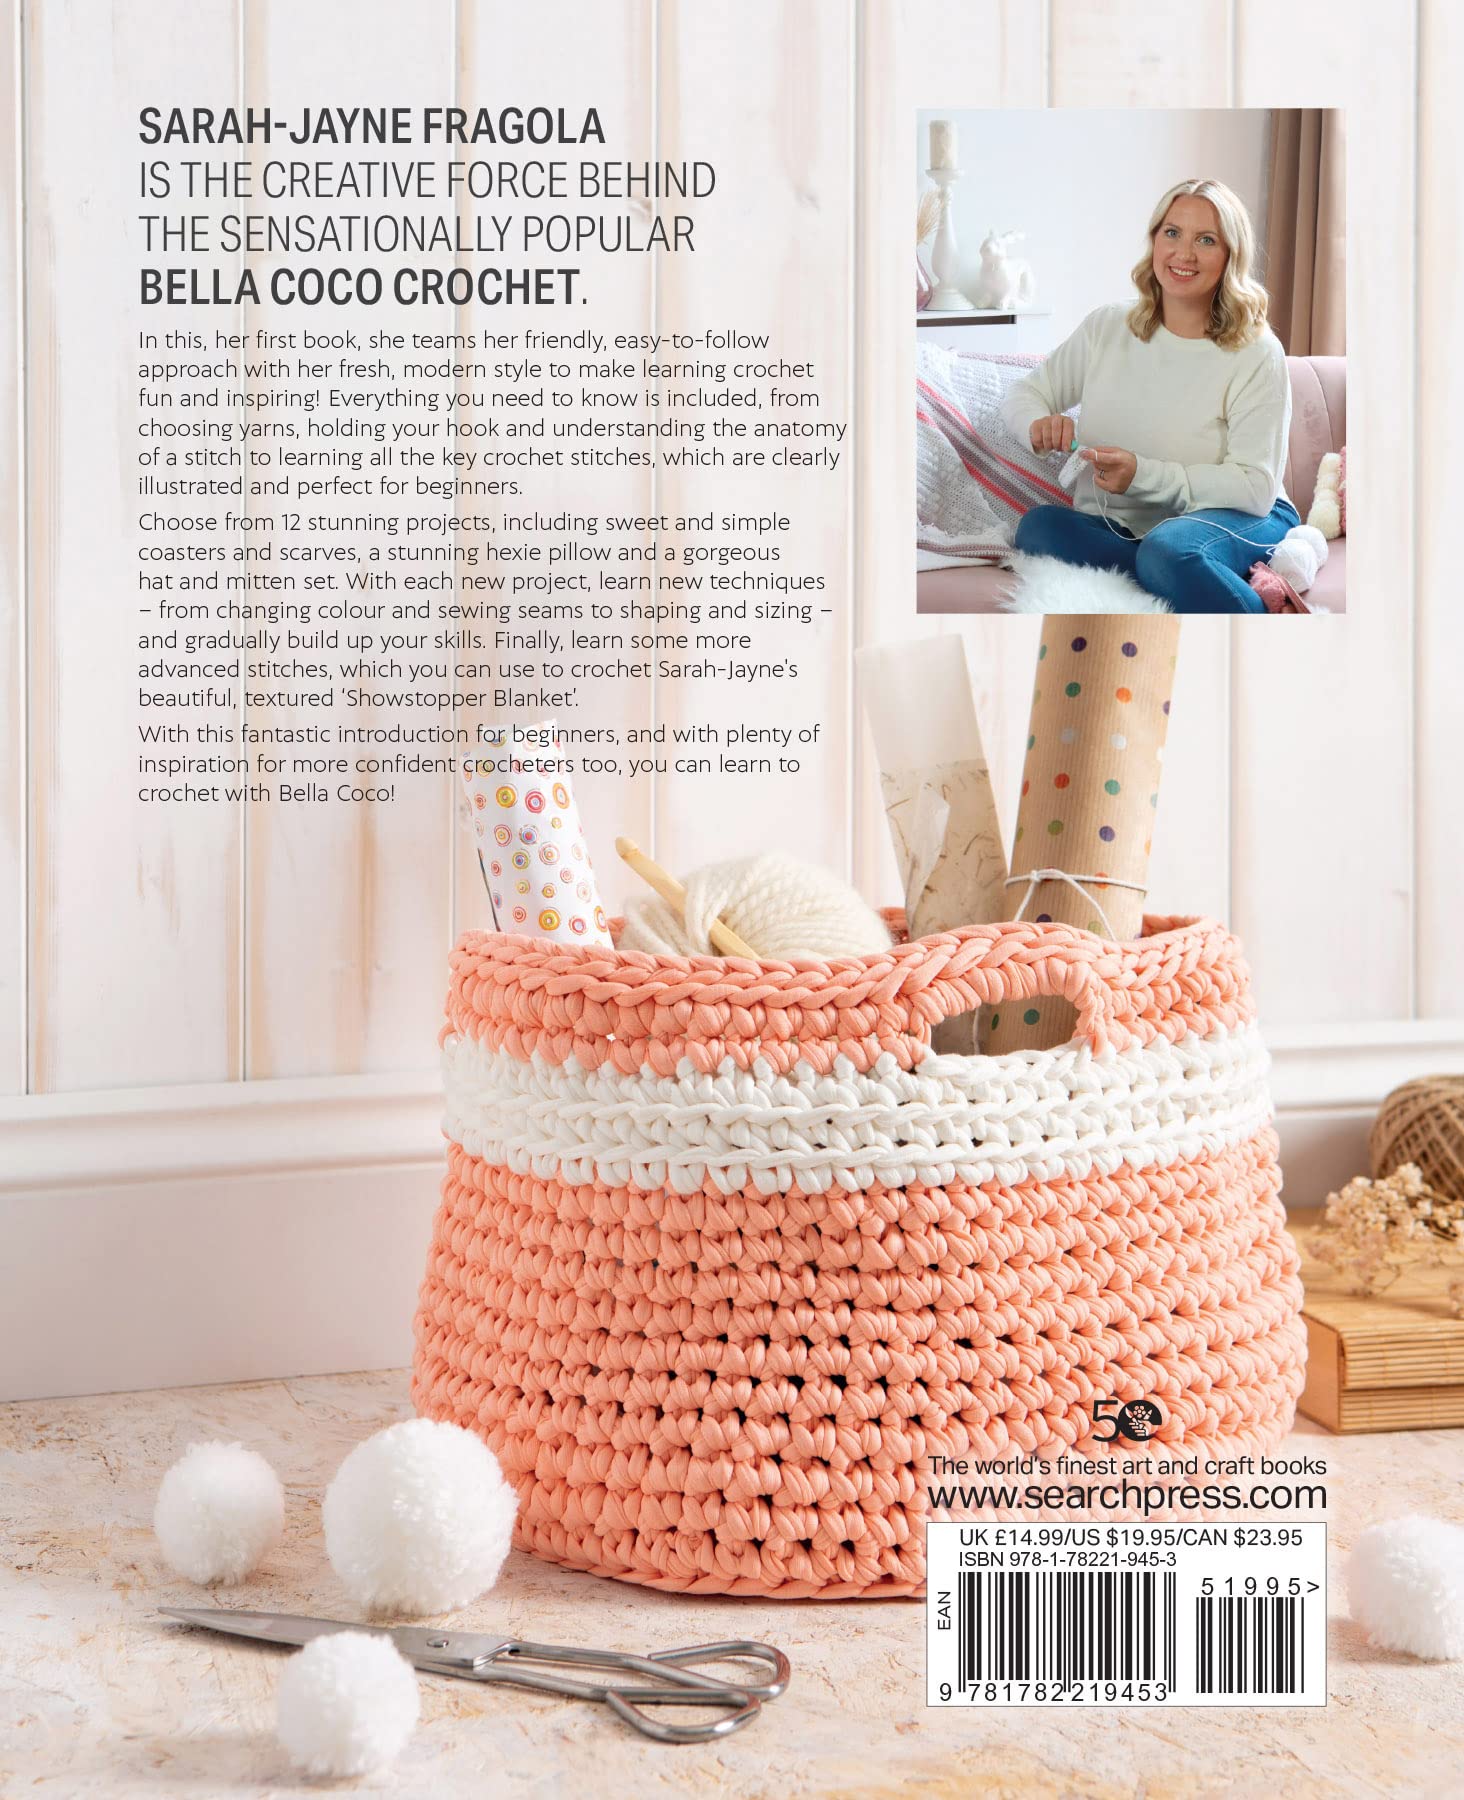 You Can Crochet With Bella Coco